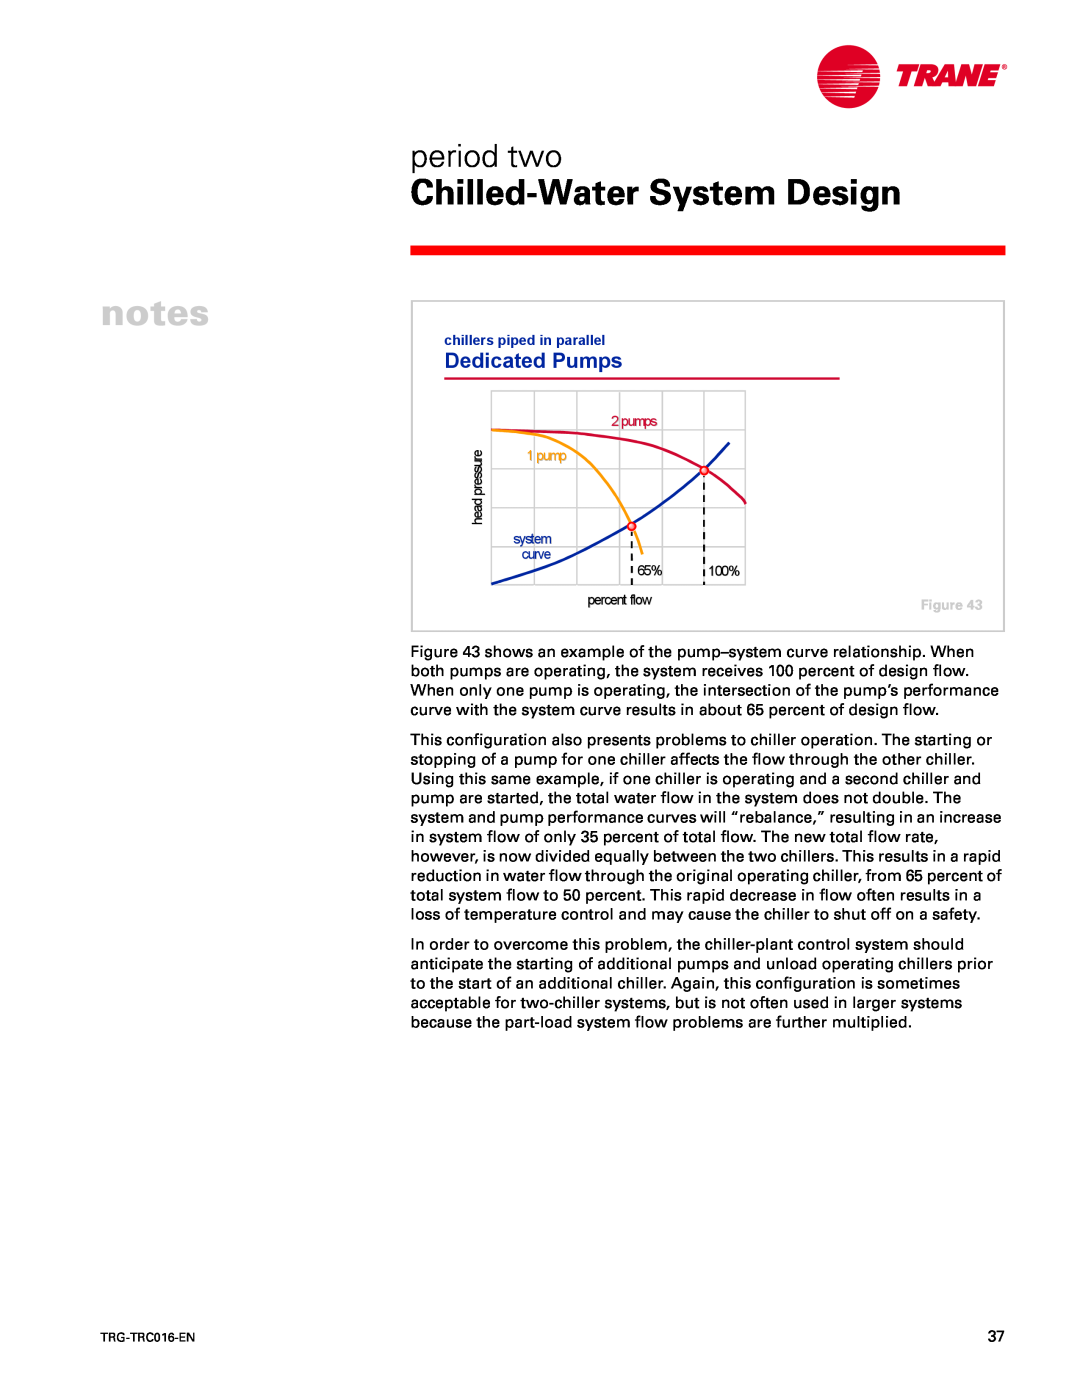 Trane TRG-TRC016-EN manual notes, Chilled-WaterSystem Design, period two, Dedicated Pumps 